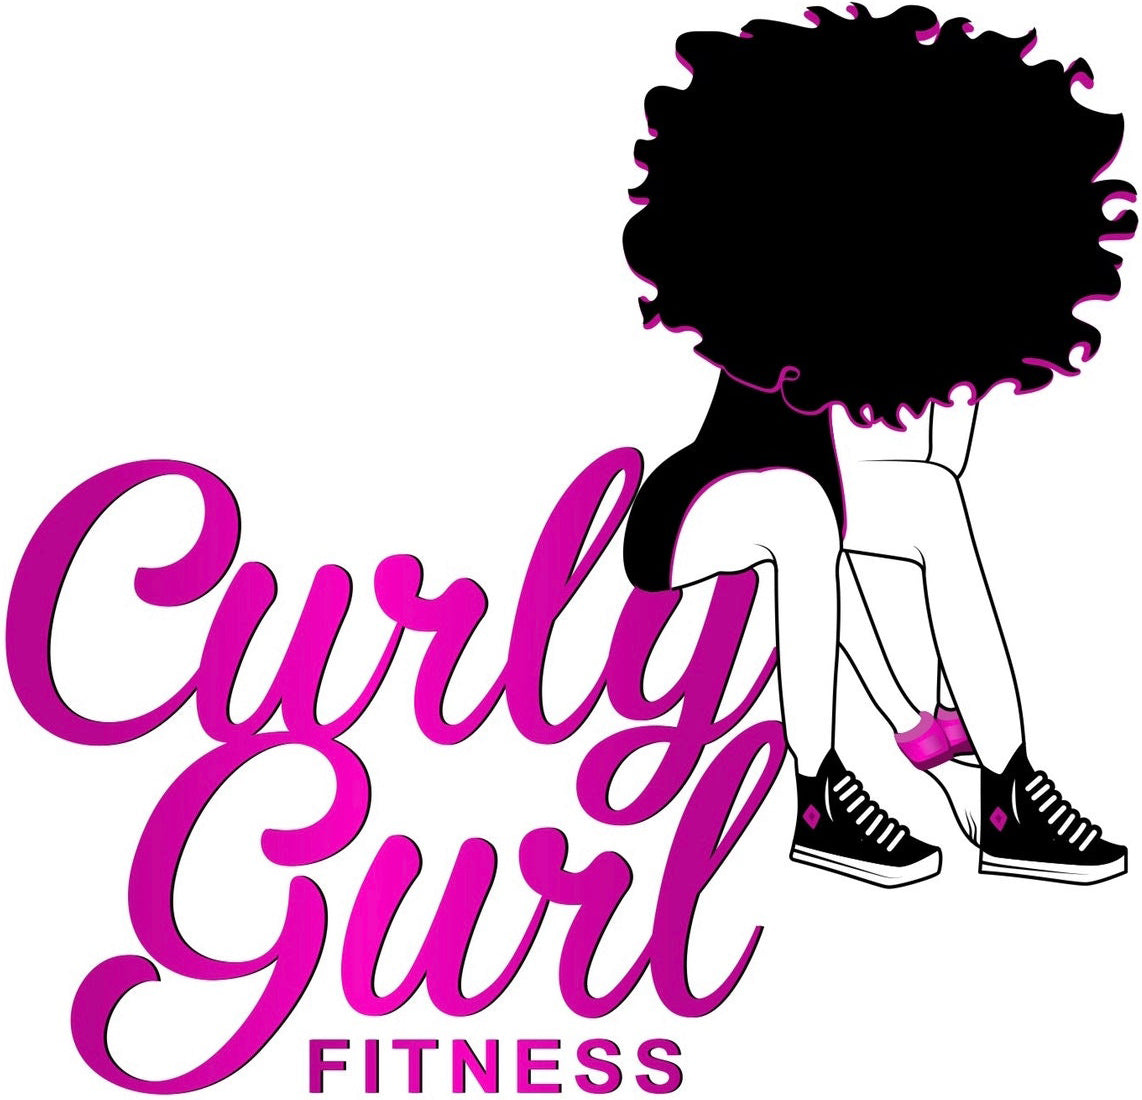 The Curly Girl - Activewear